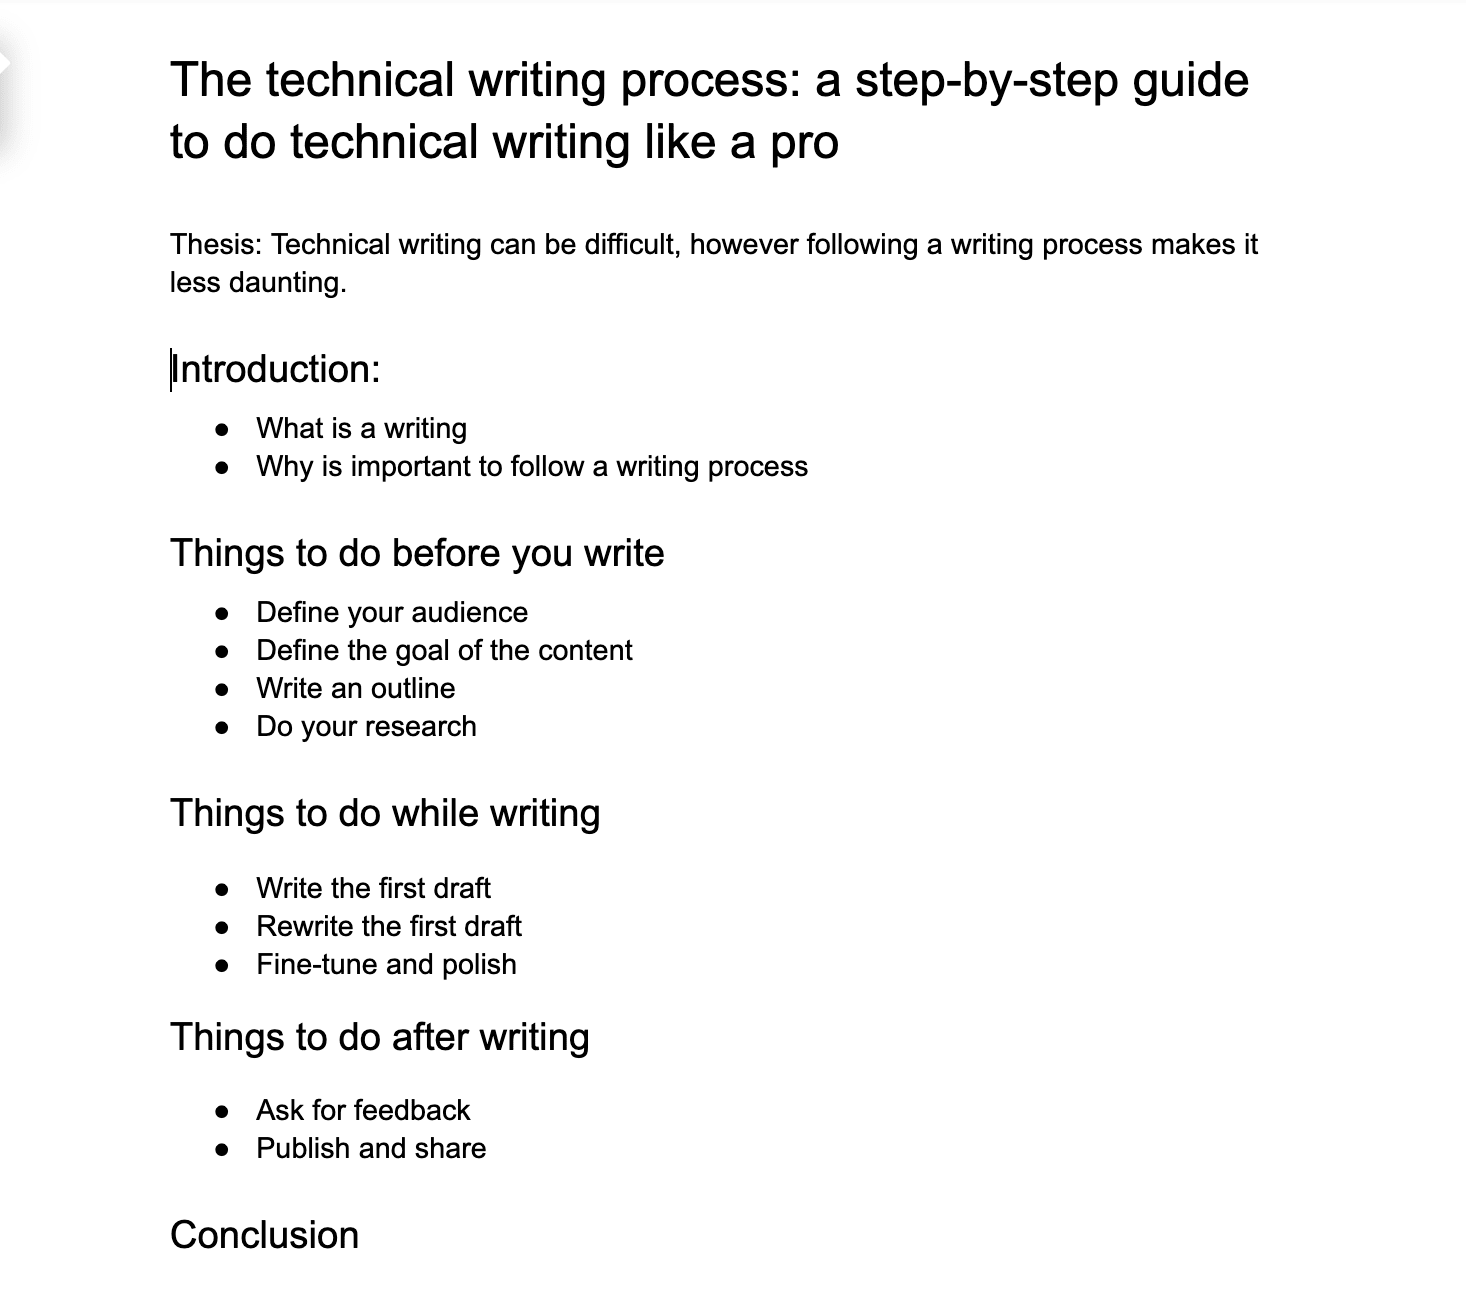 write an essay about technical writing